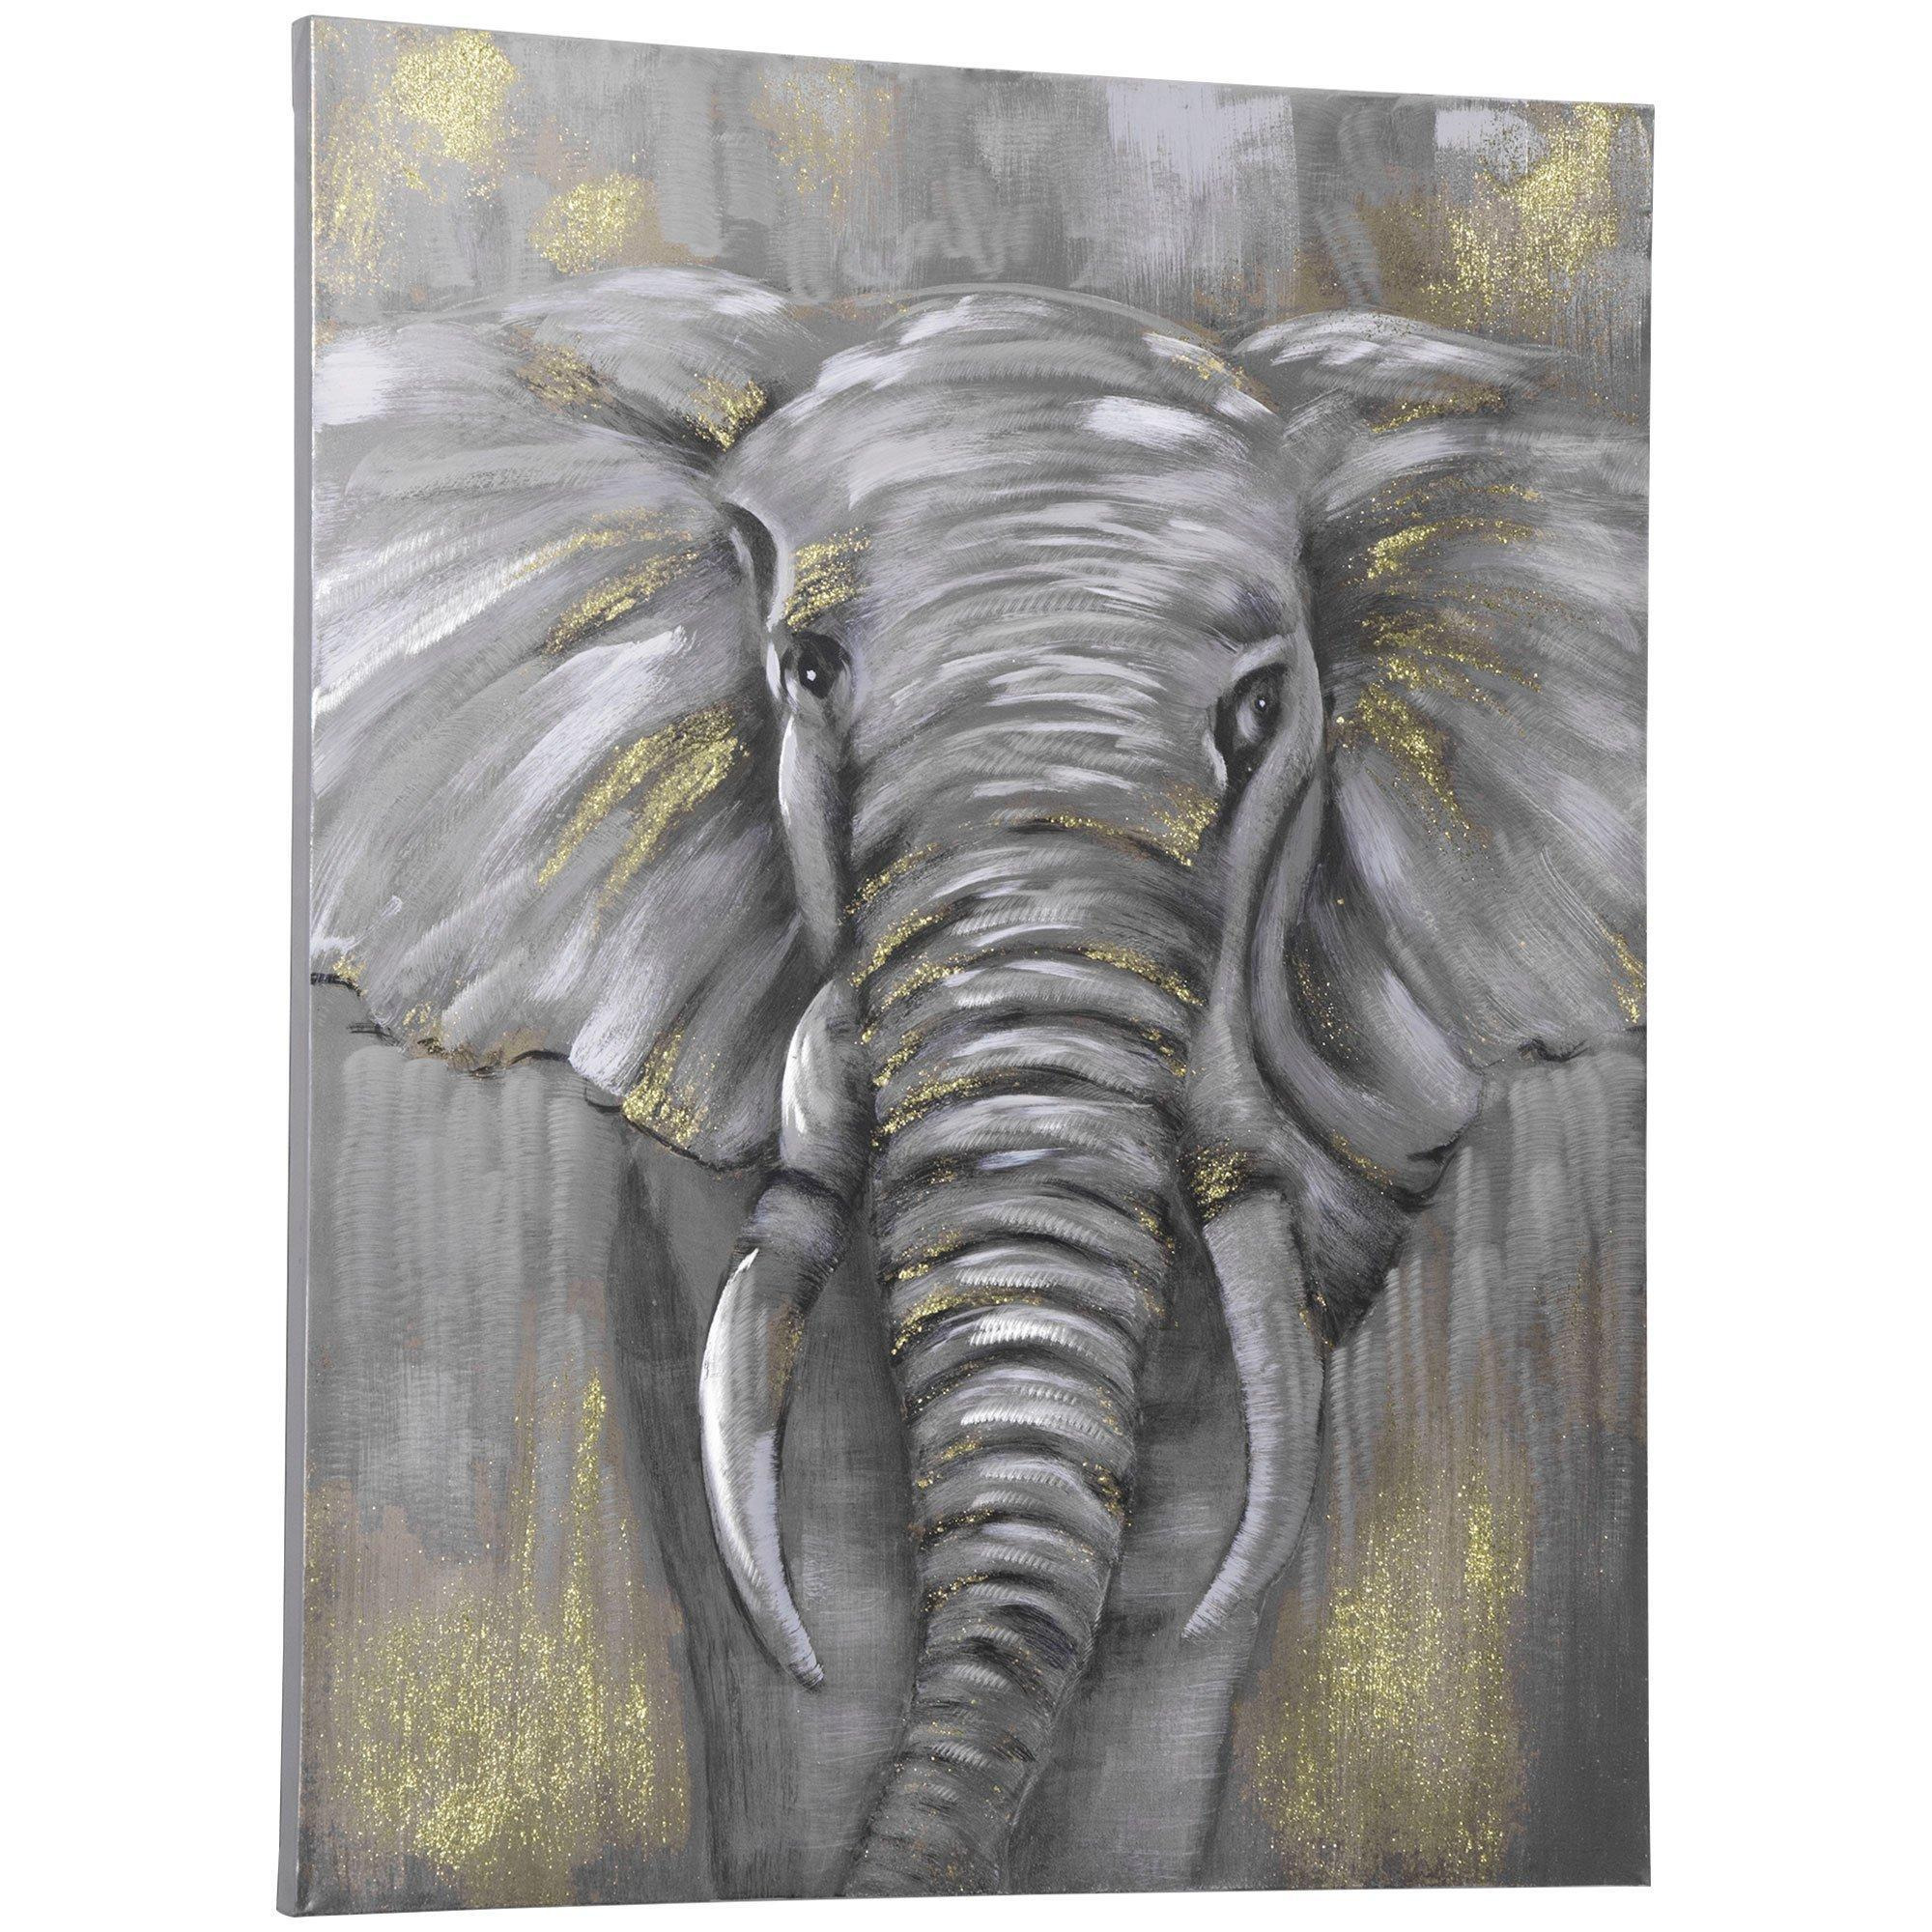 Hand-Painted Metal Canvas Wall Art Elephant, Wall Pictures Decor, 100 x 80 cm - image 1